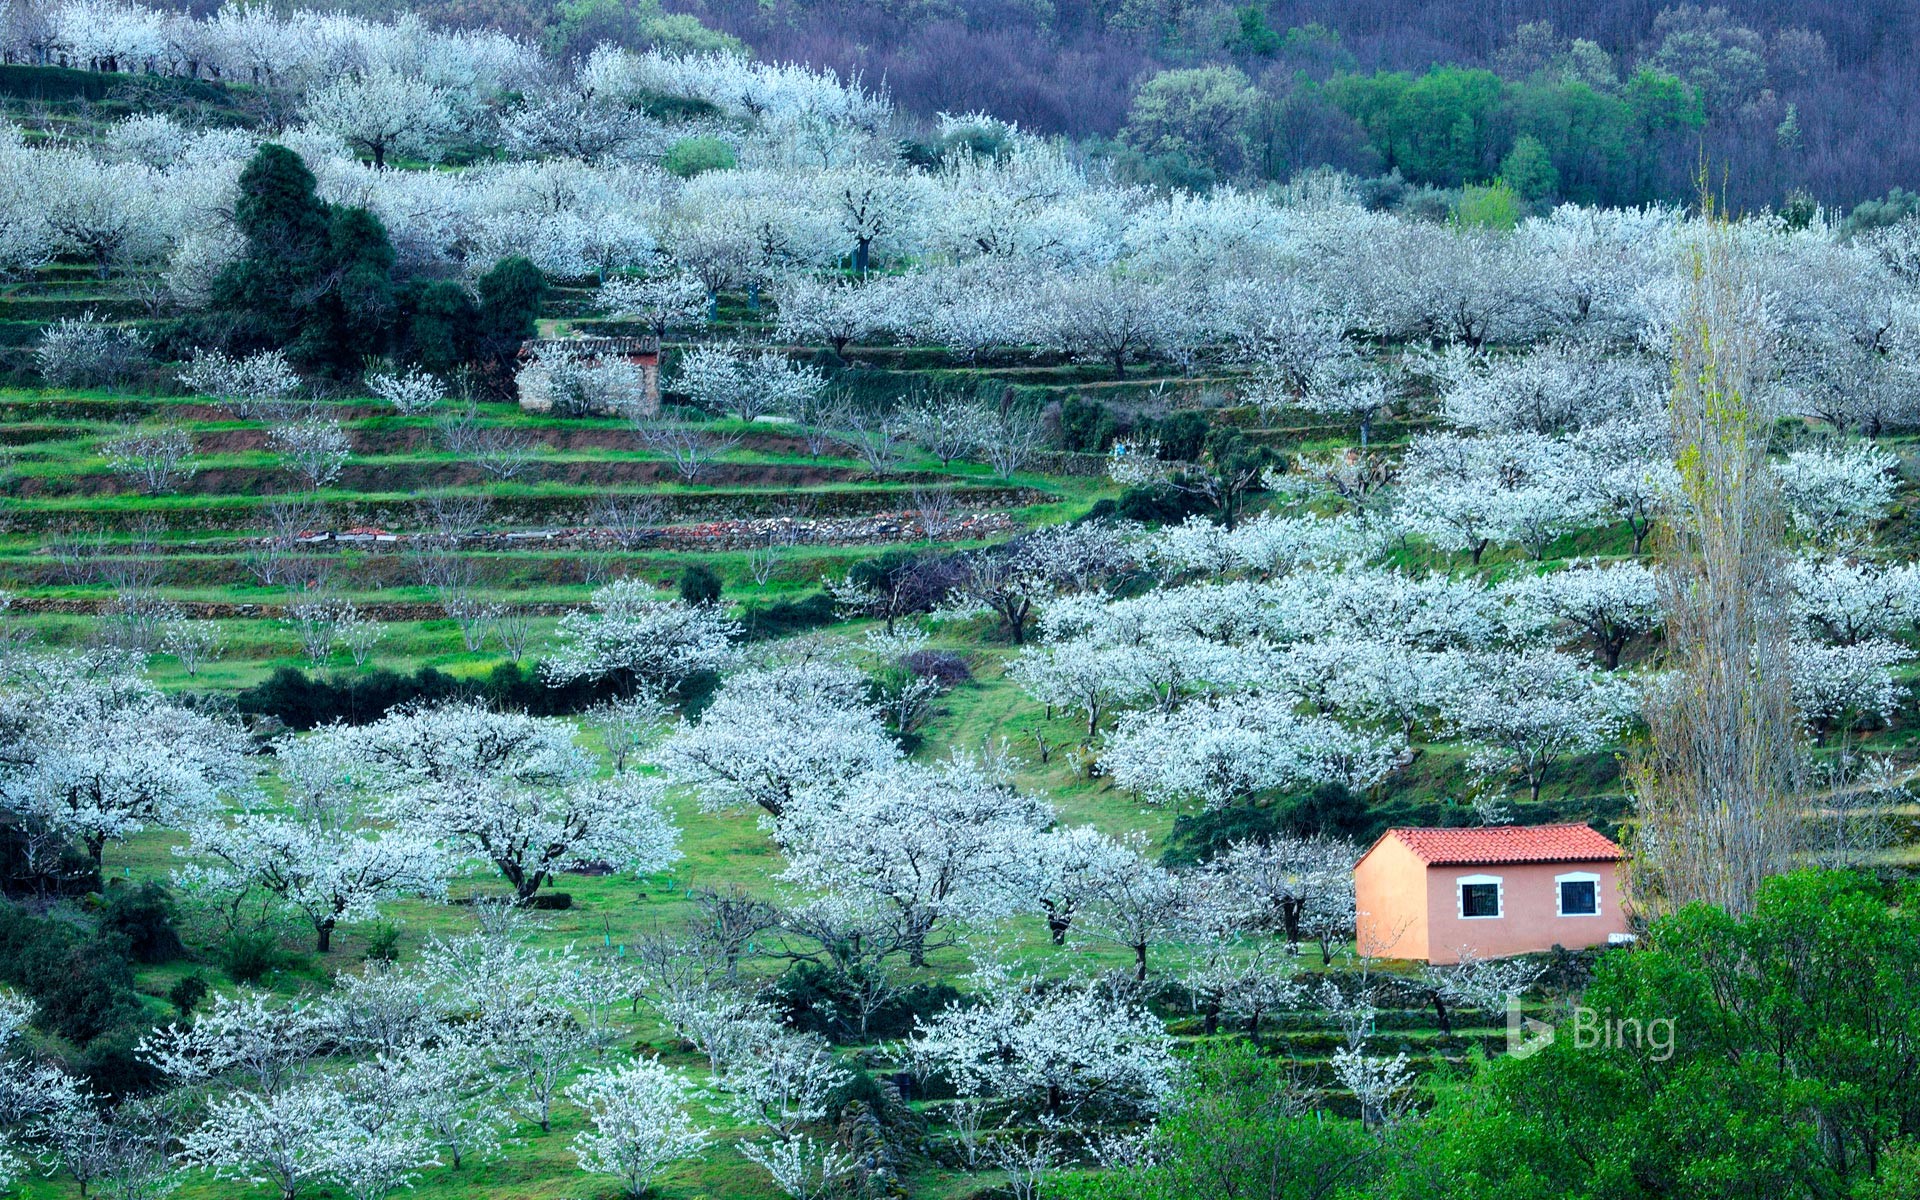 Blooming cherry trees in the Jerte Valley, province of Cáceres, Spain